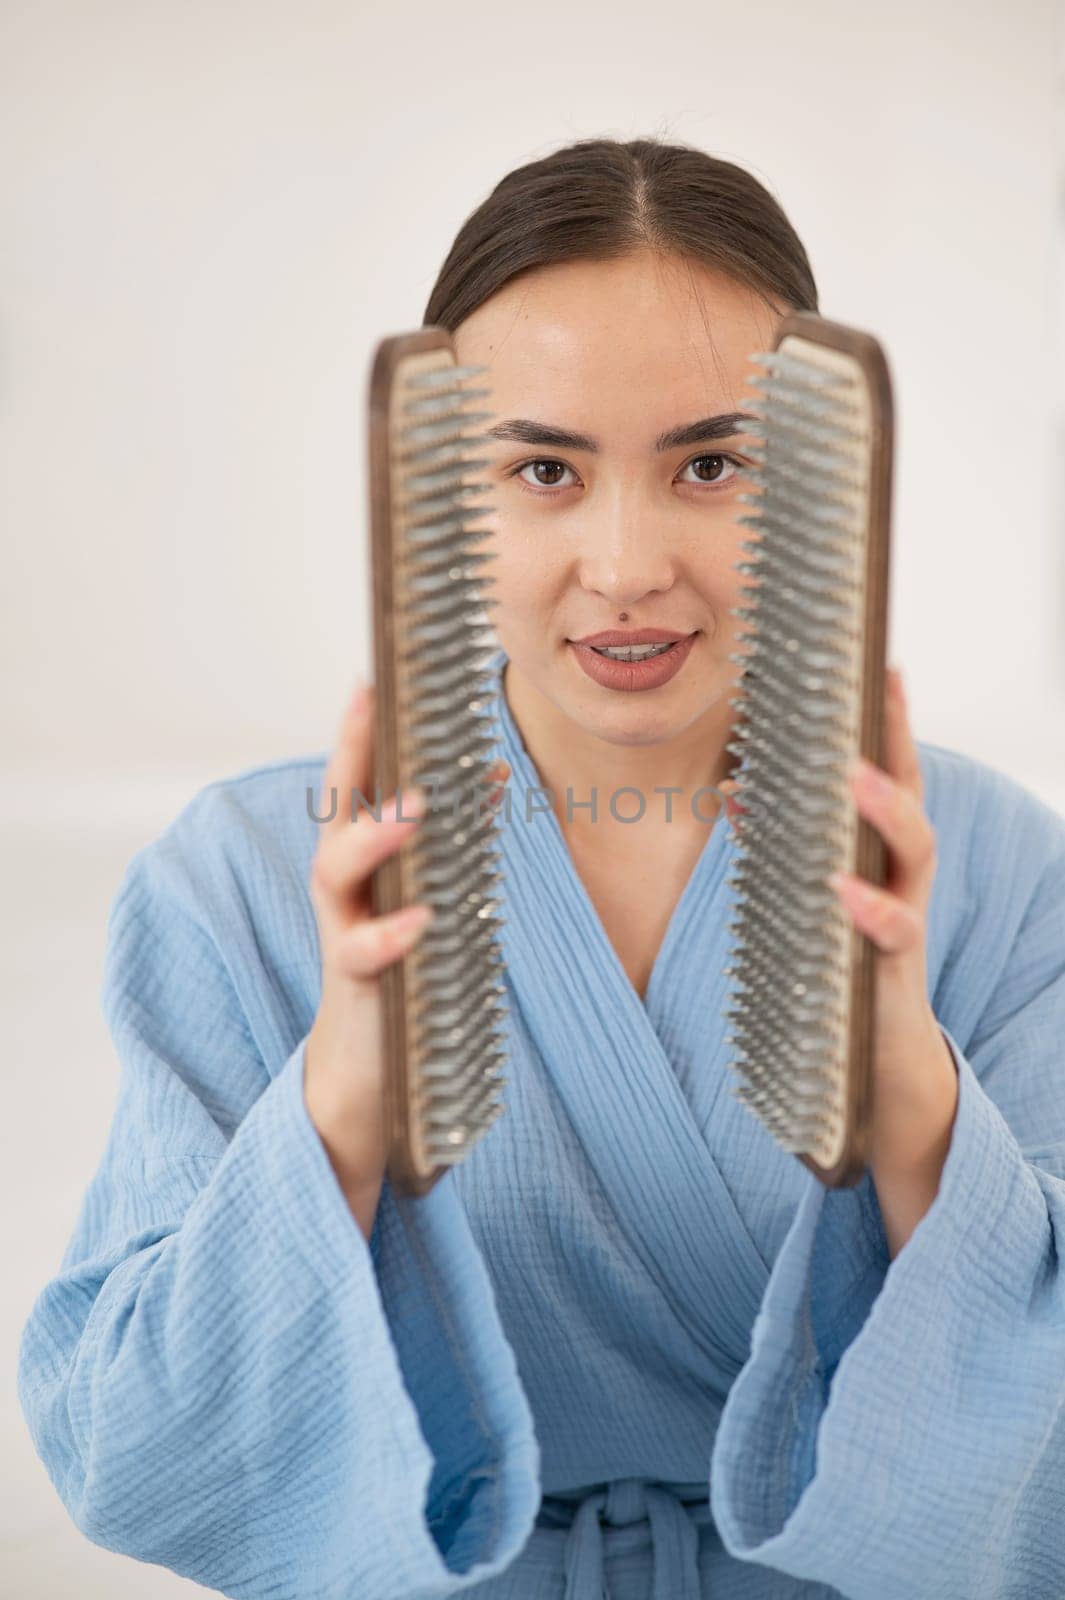 Asian woman holding sadhu boards on face background